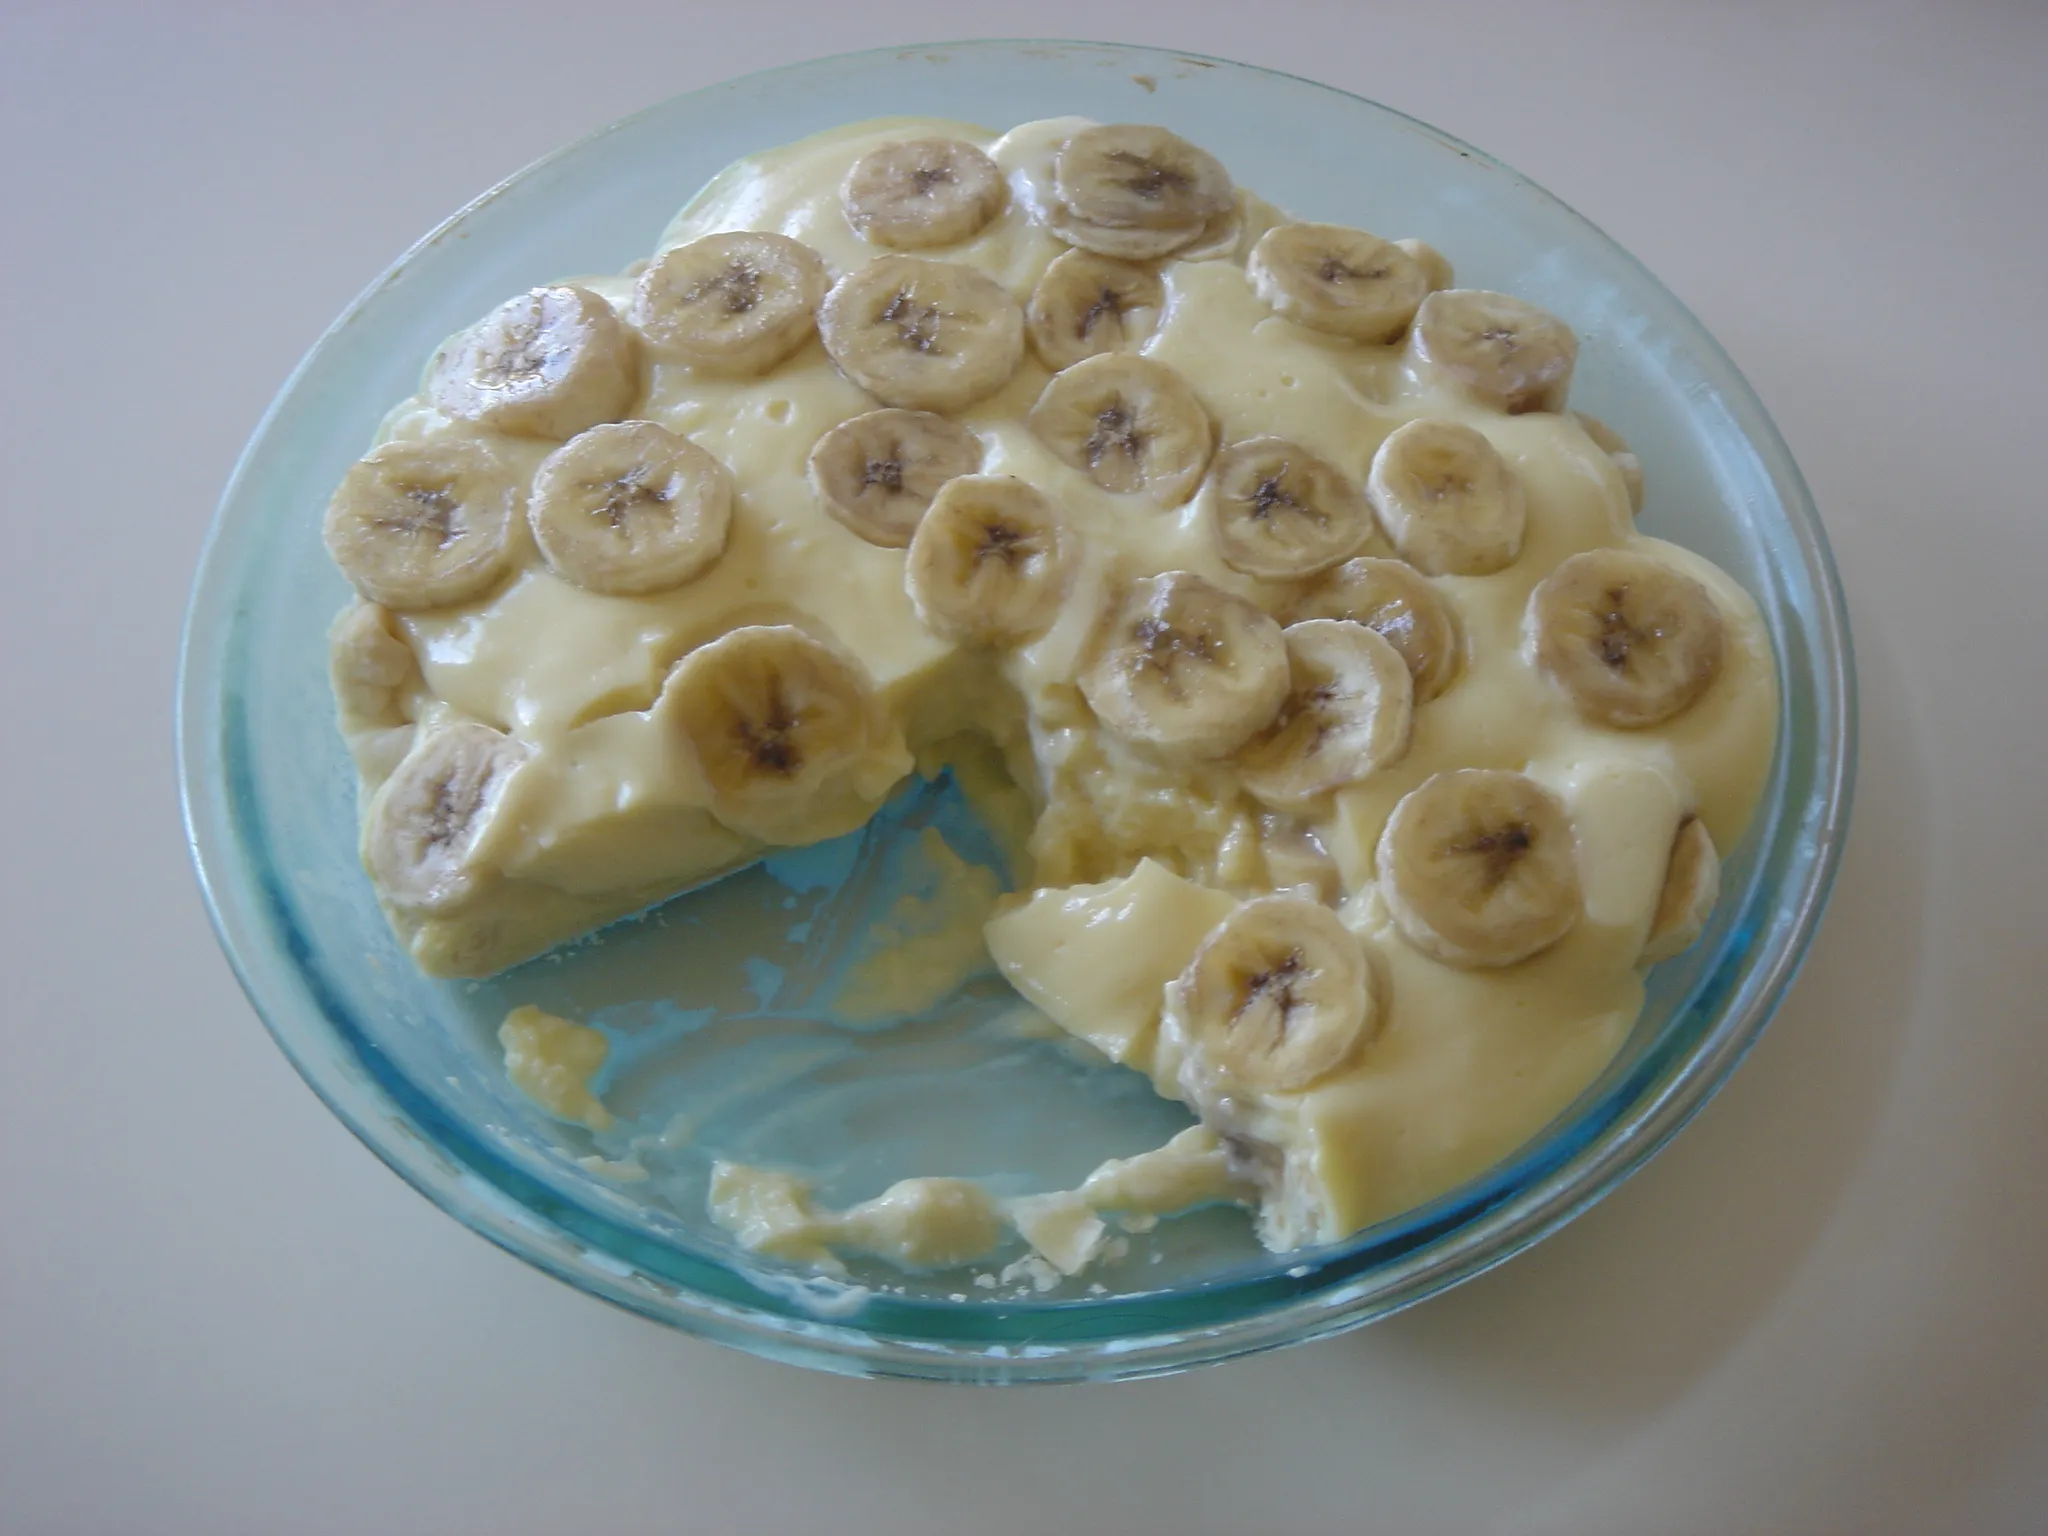 Delicious Banana Pudding Recipe with Instant Pudding – Tips & Twists